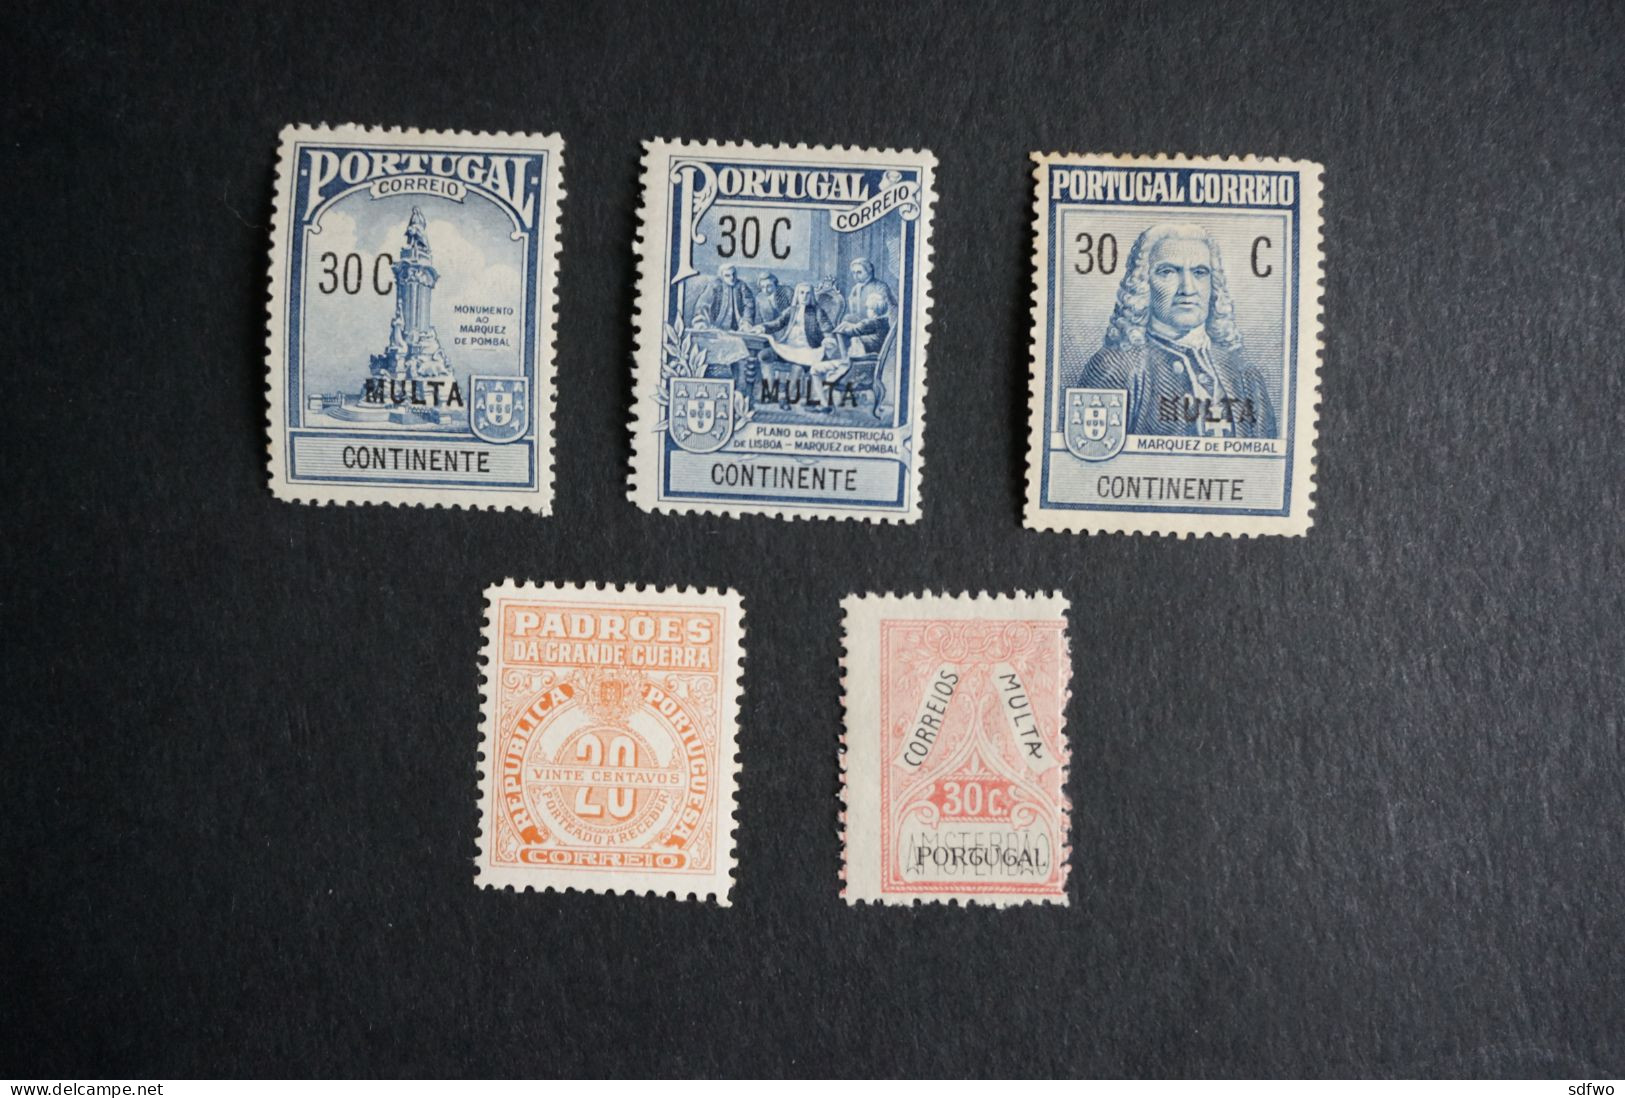 (T2) Portugal 1925/1928 - Postal Tax / Postage Due, WWI, Olympics - MH - Unused Stamps